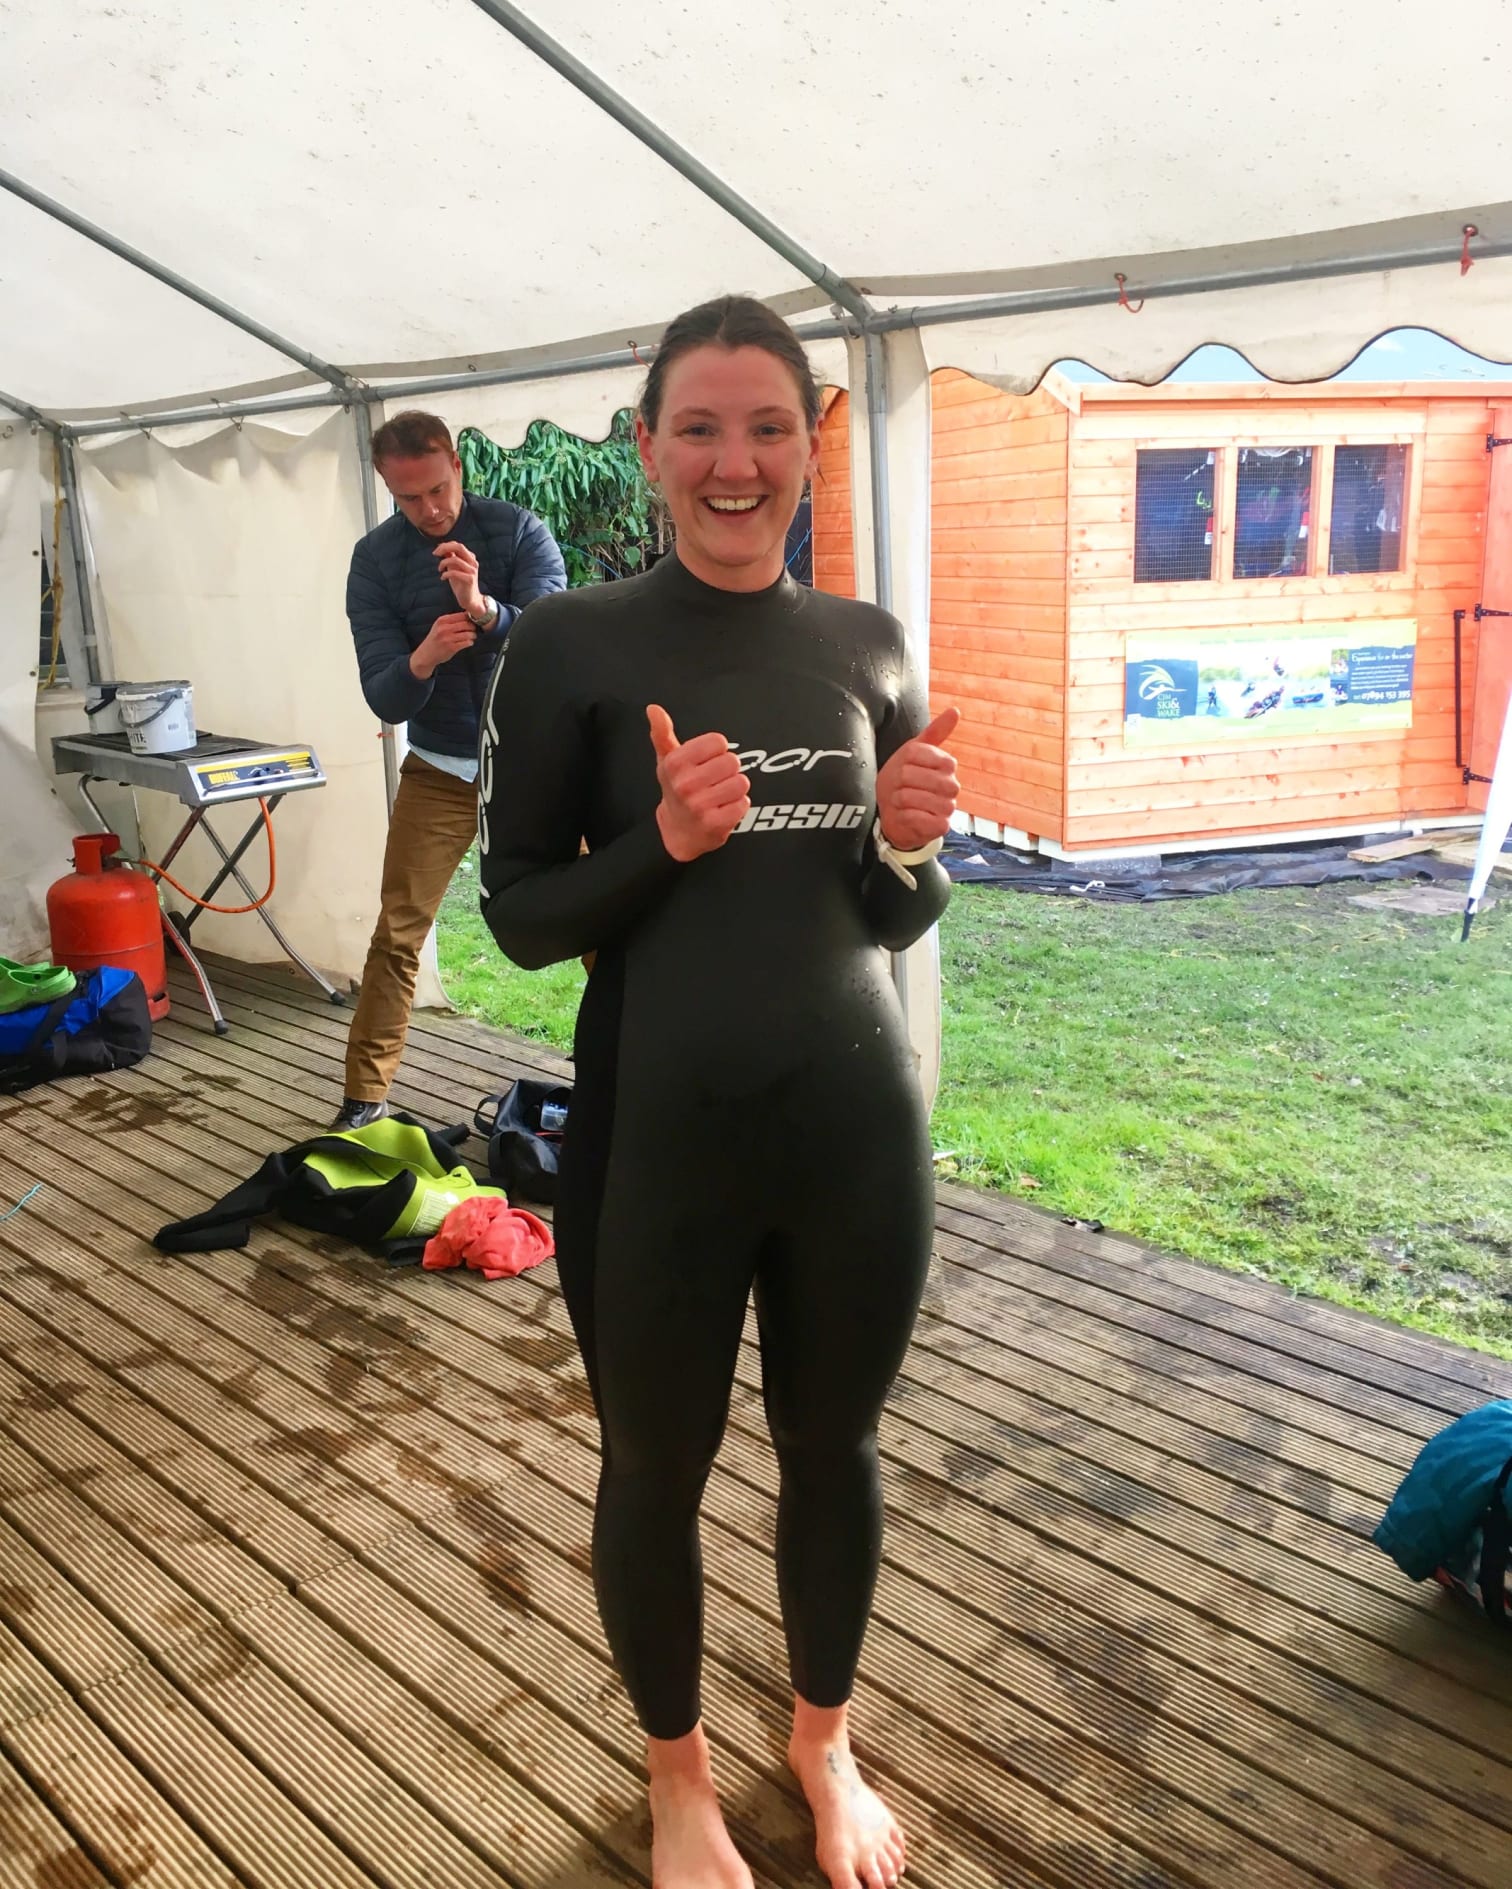 Sarah-Jane in her wetsuit smiling